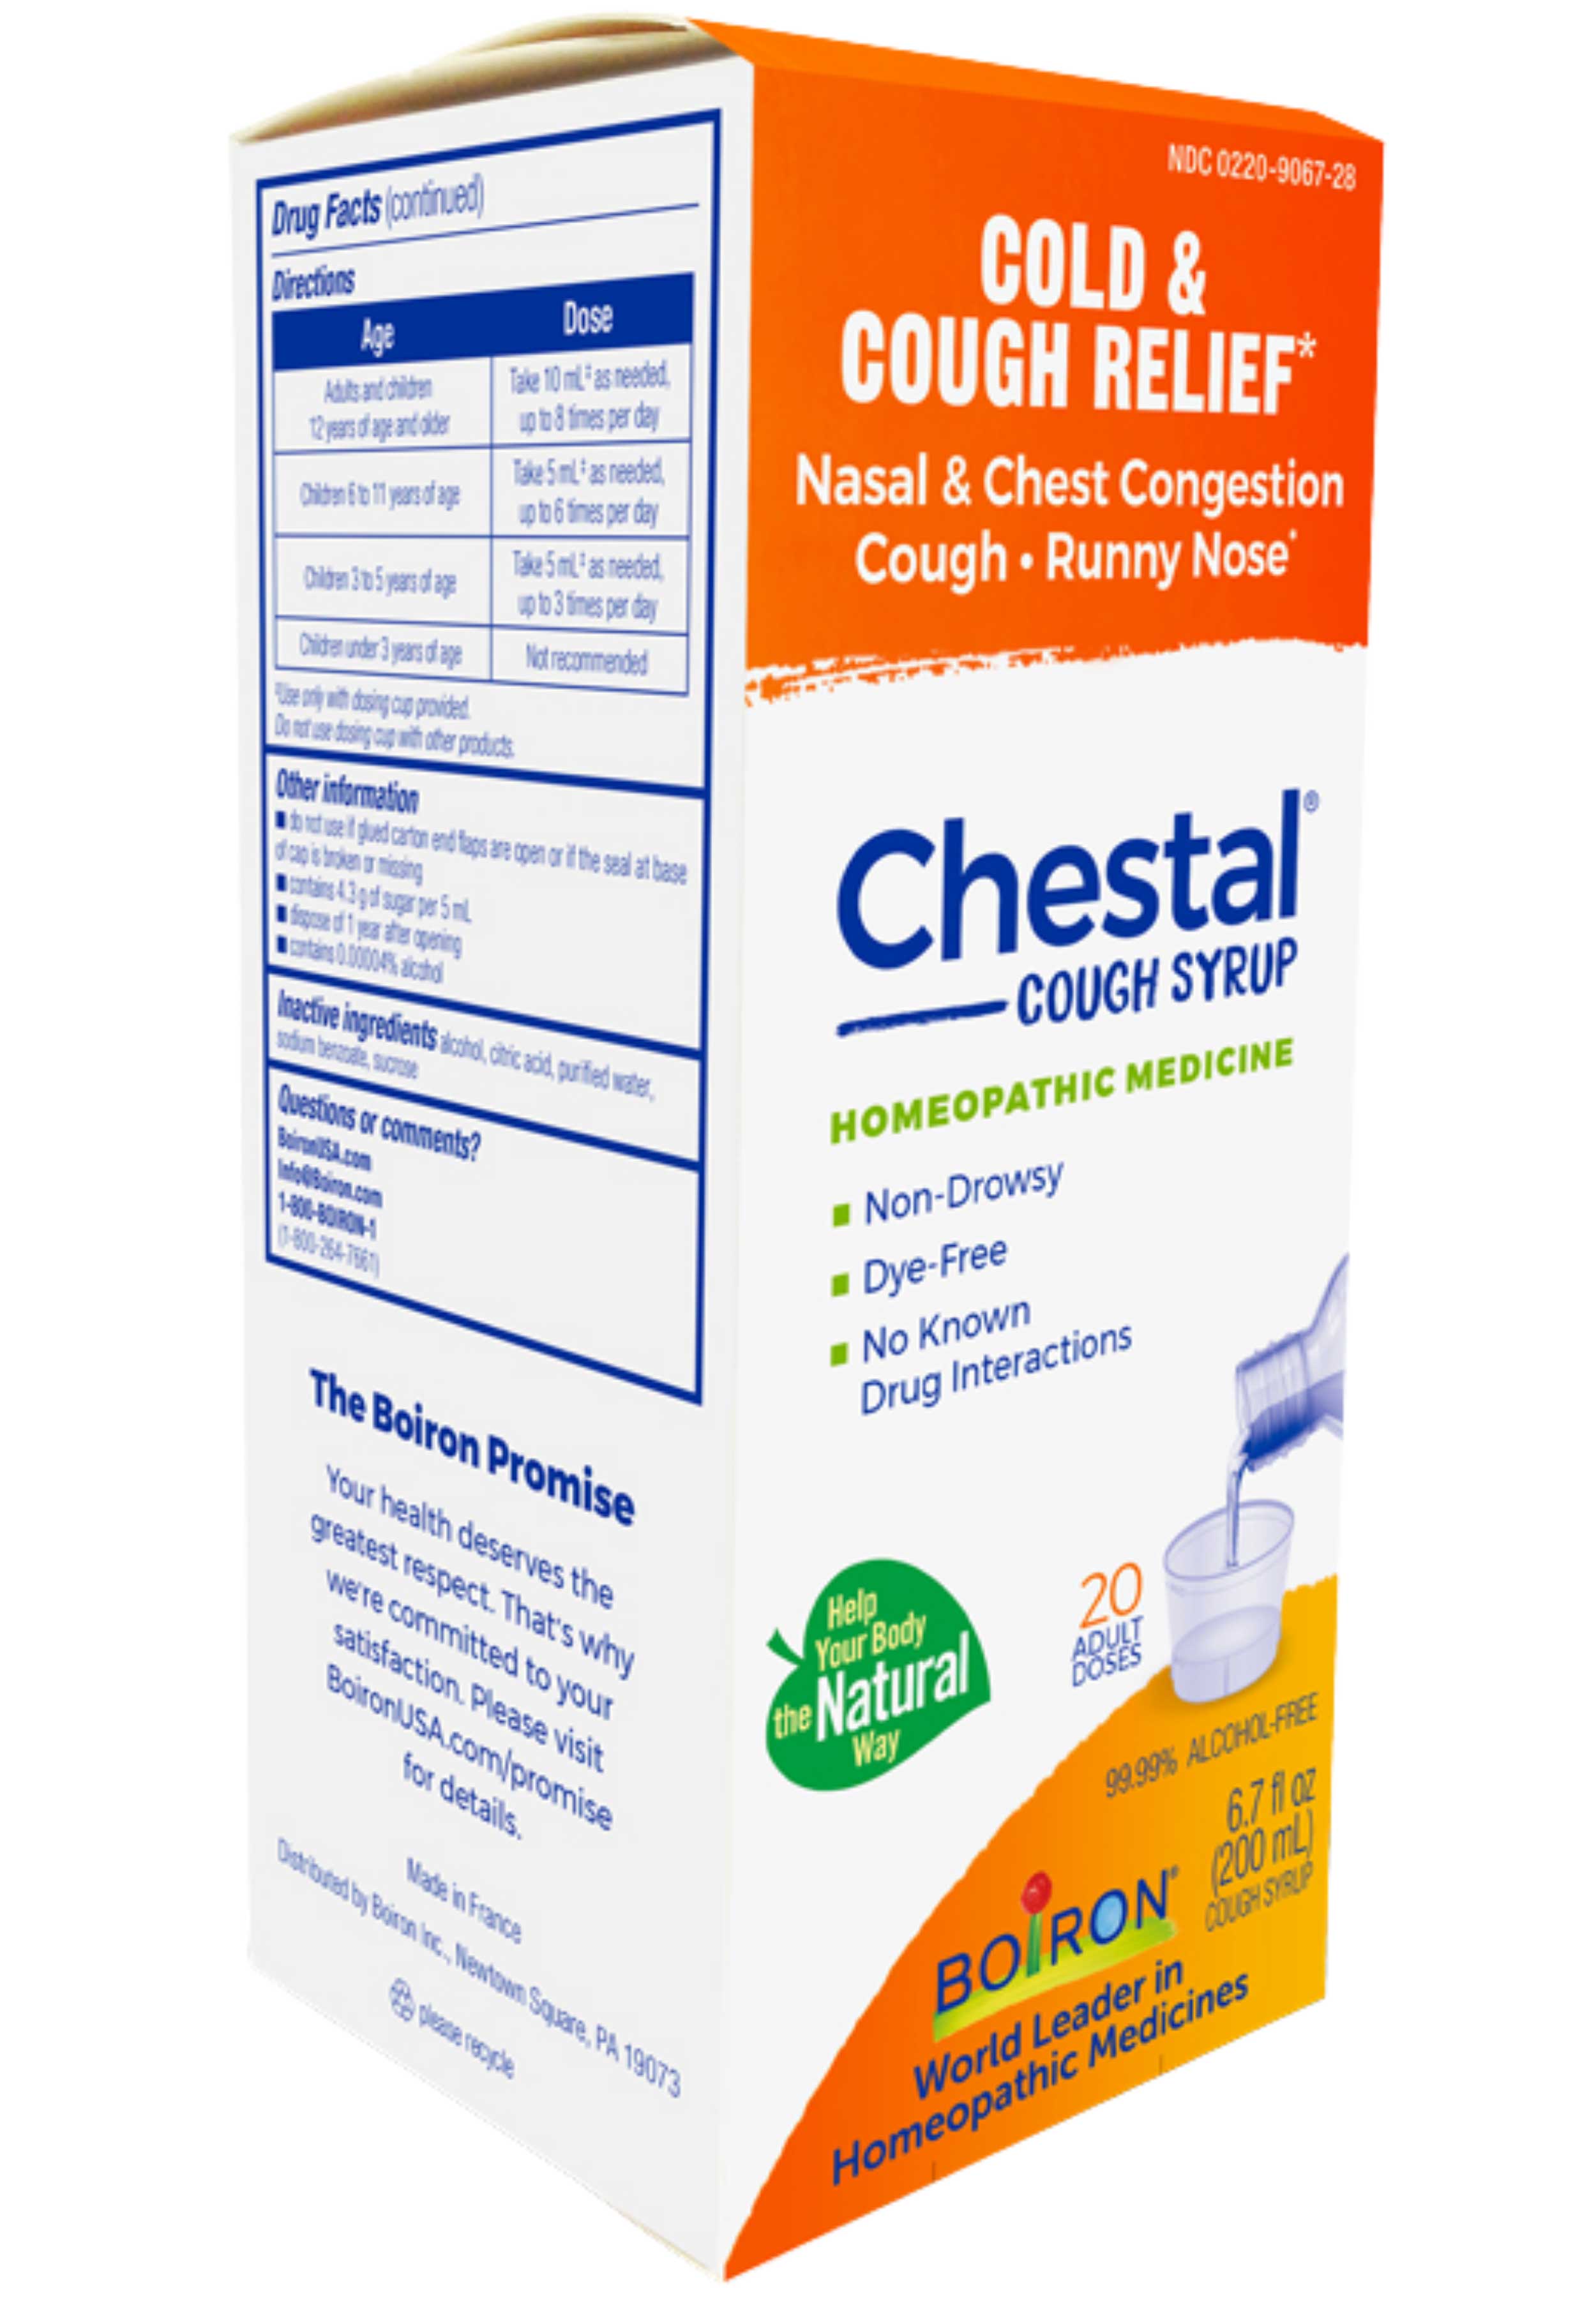 Boiron Homeopathics Chestal Adult Cough & Cold